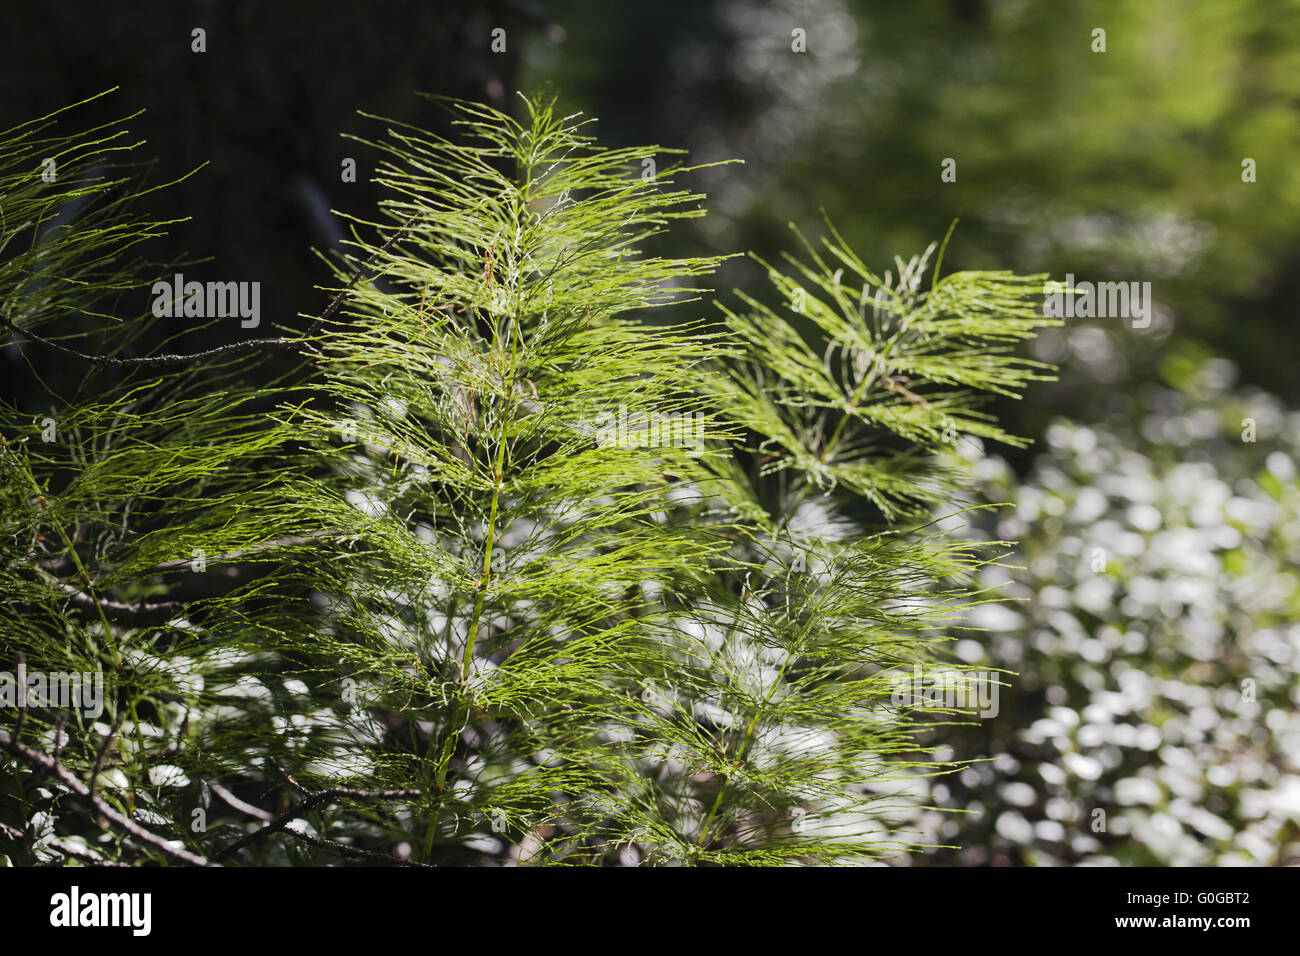 Horsetail plants in the backlight Stock Photo